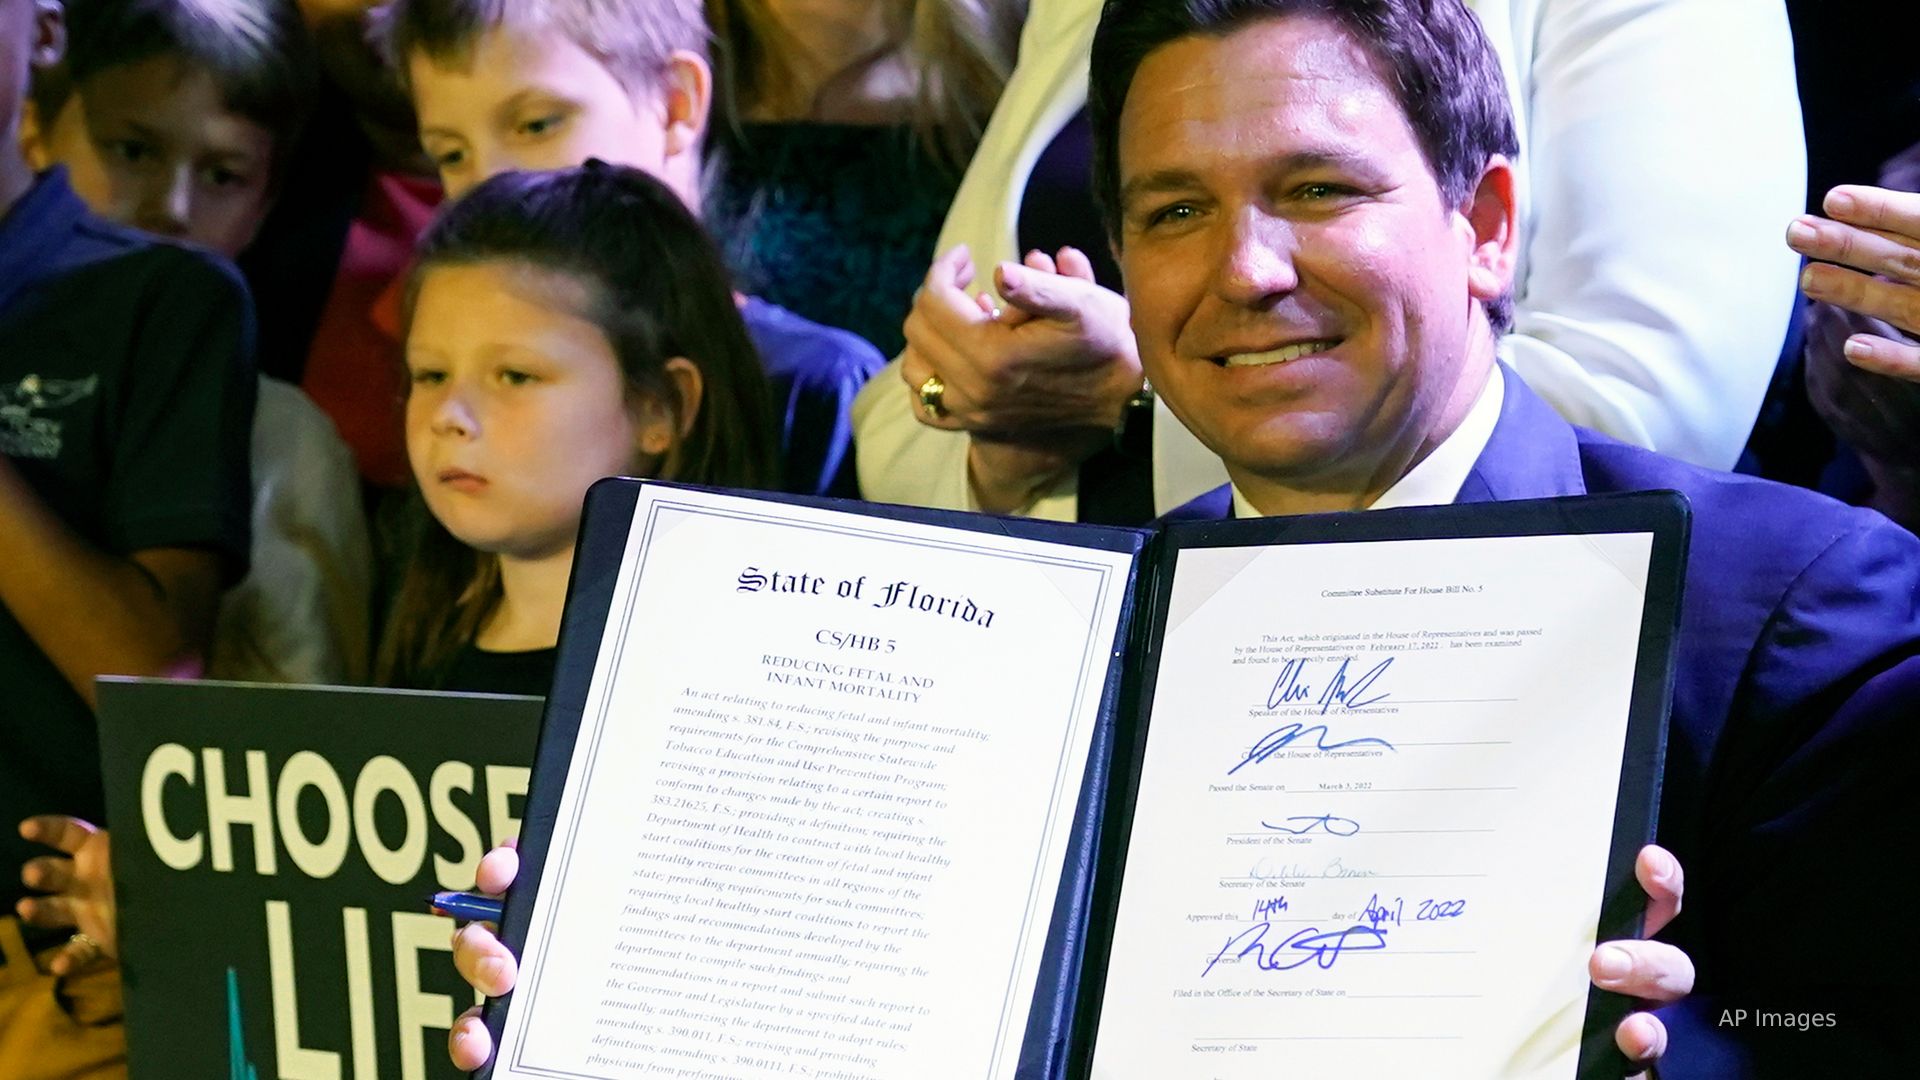 "The Heartbeat Protection Act" has been signed into law by Florida governor Ron DeSantis. It bans abortions after six-weeks of pregnancy.